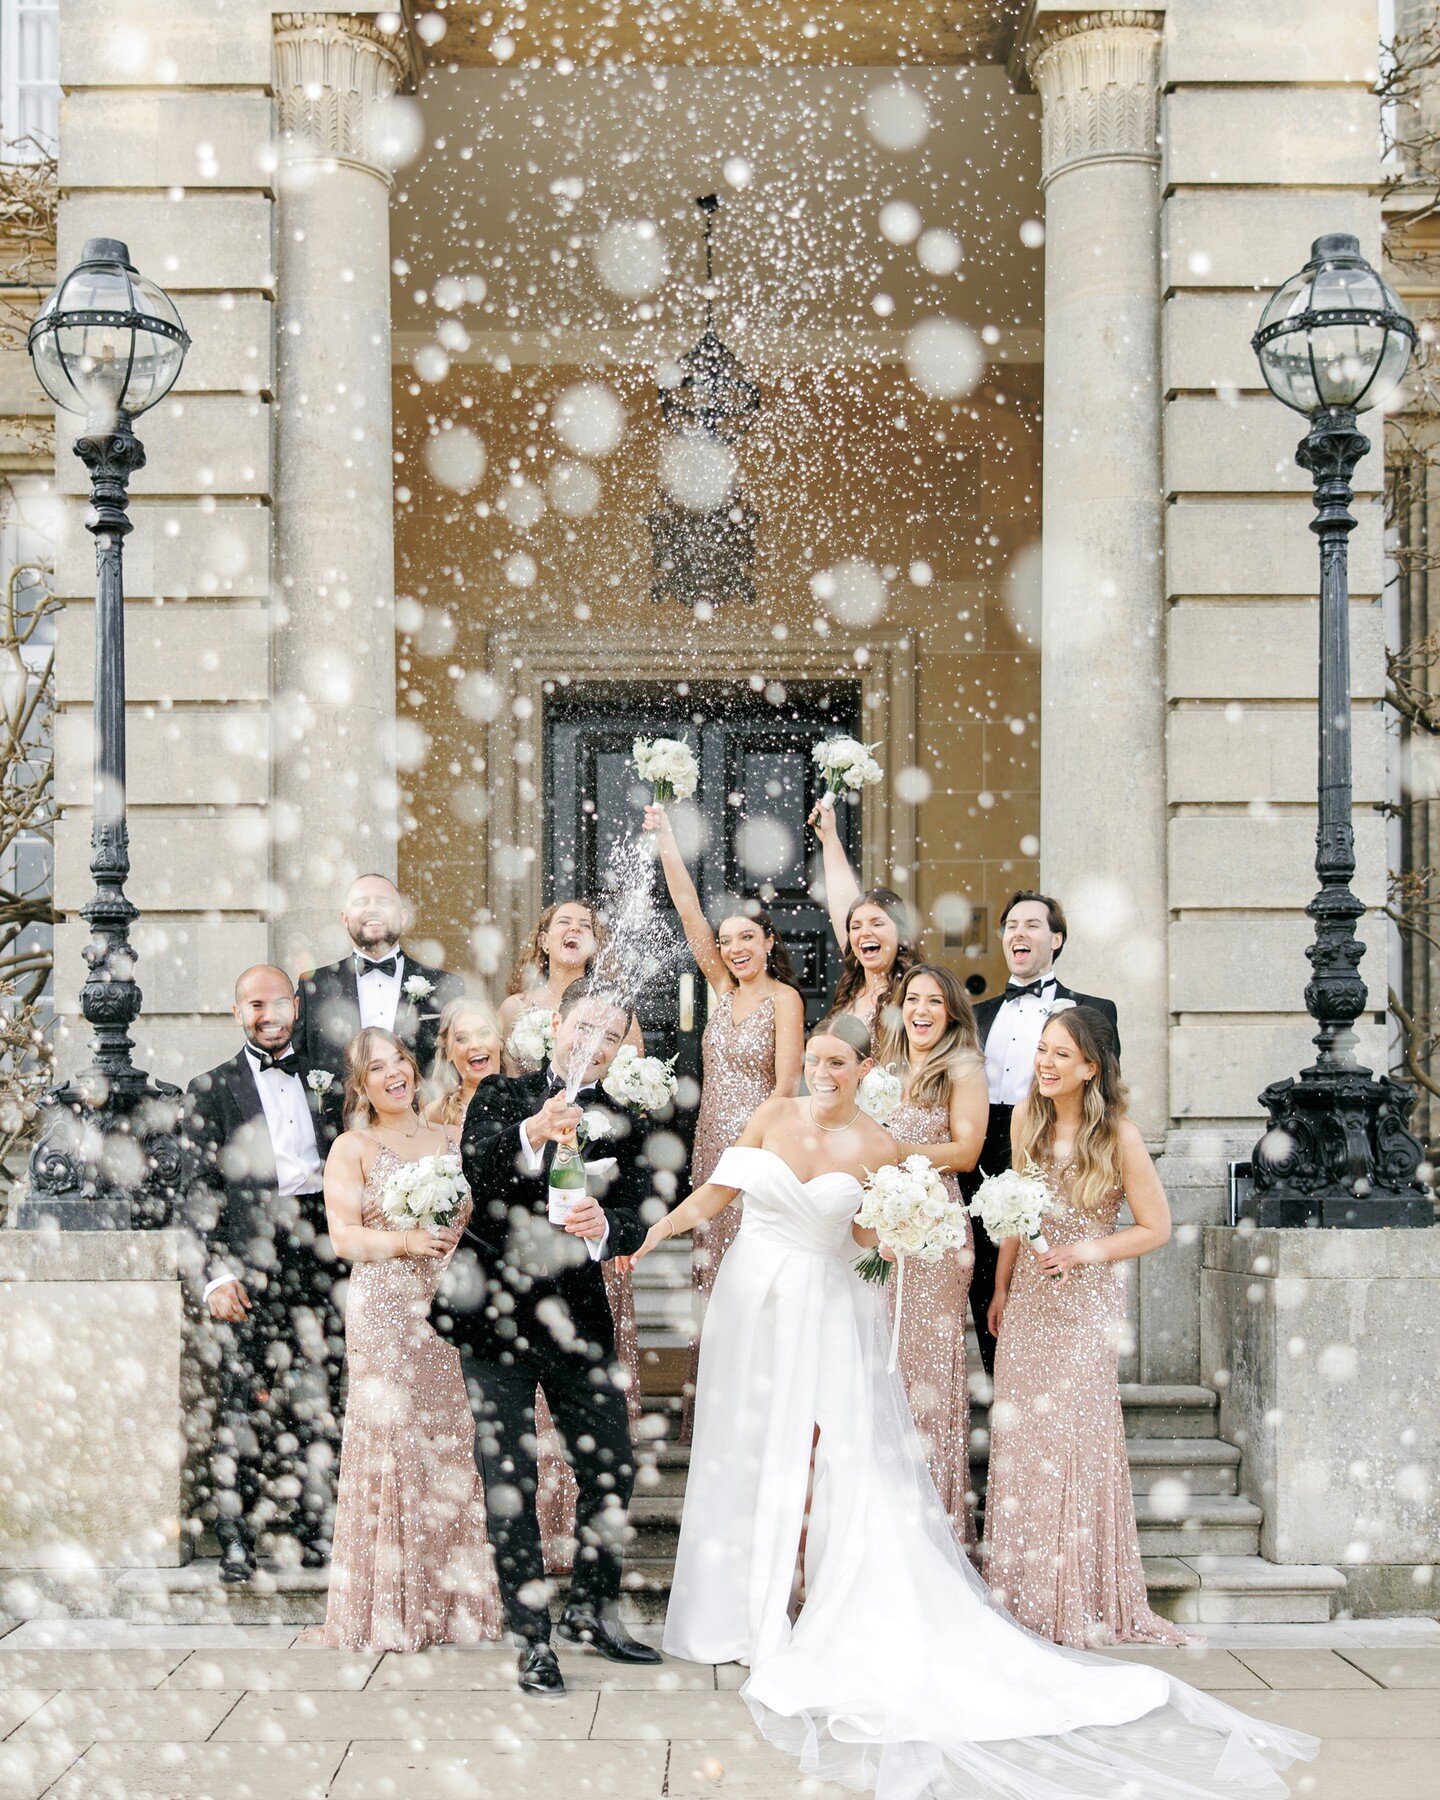 We're celebrating the start of wedding season over here! Our hearts are absolutely bursting after some truly wonderful weddings - once we get into full swing again we realise how much we missed them over winter 🥰

Here are a handful of gorgeous mome